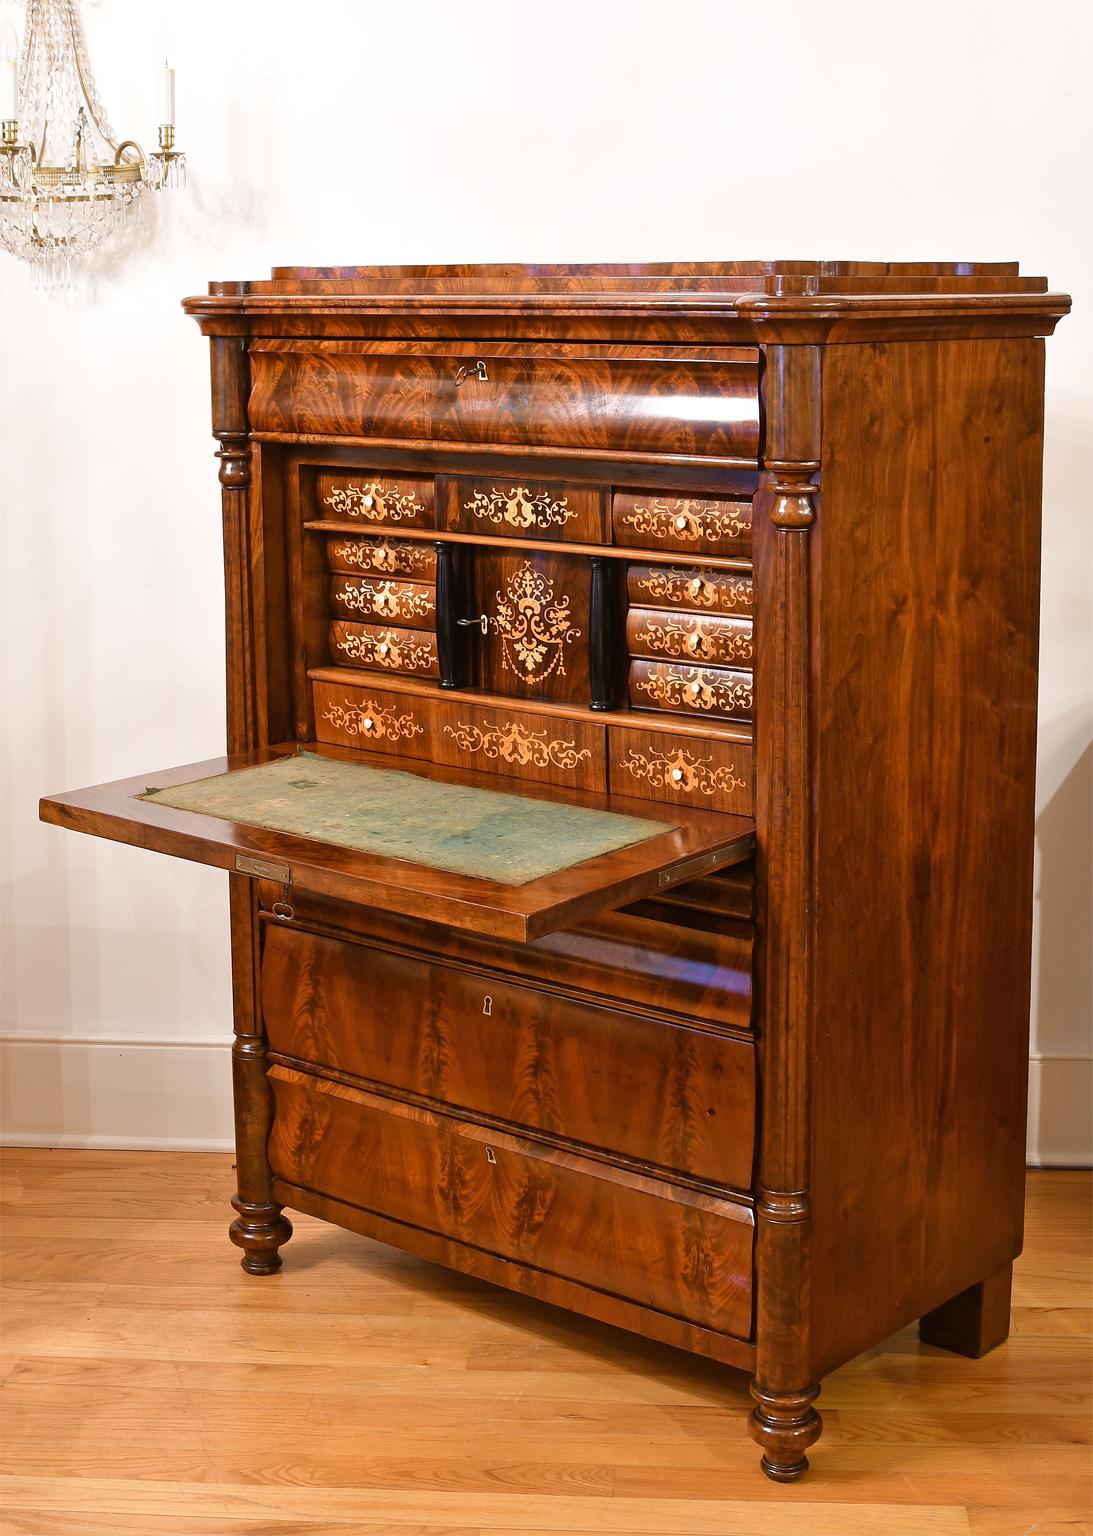 Danish Antique Chest with Fall-Front Secretary Desk in West Indies Mahogany, Denmark